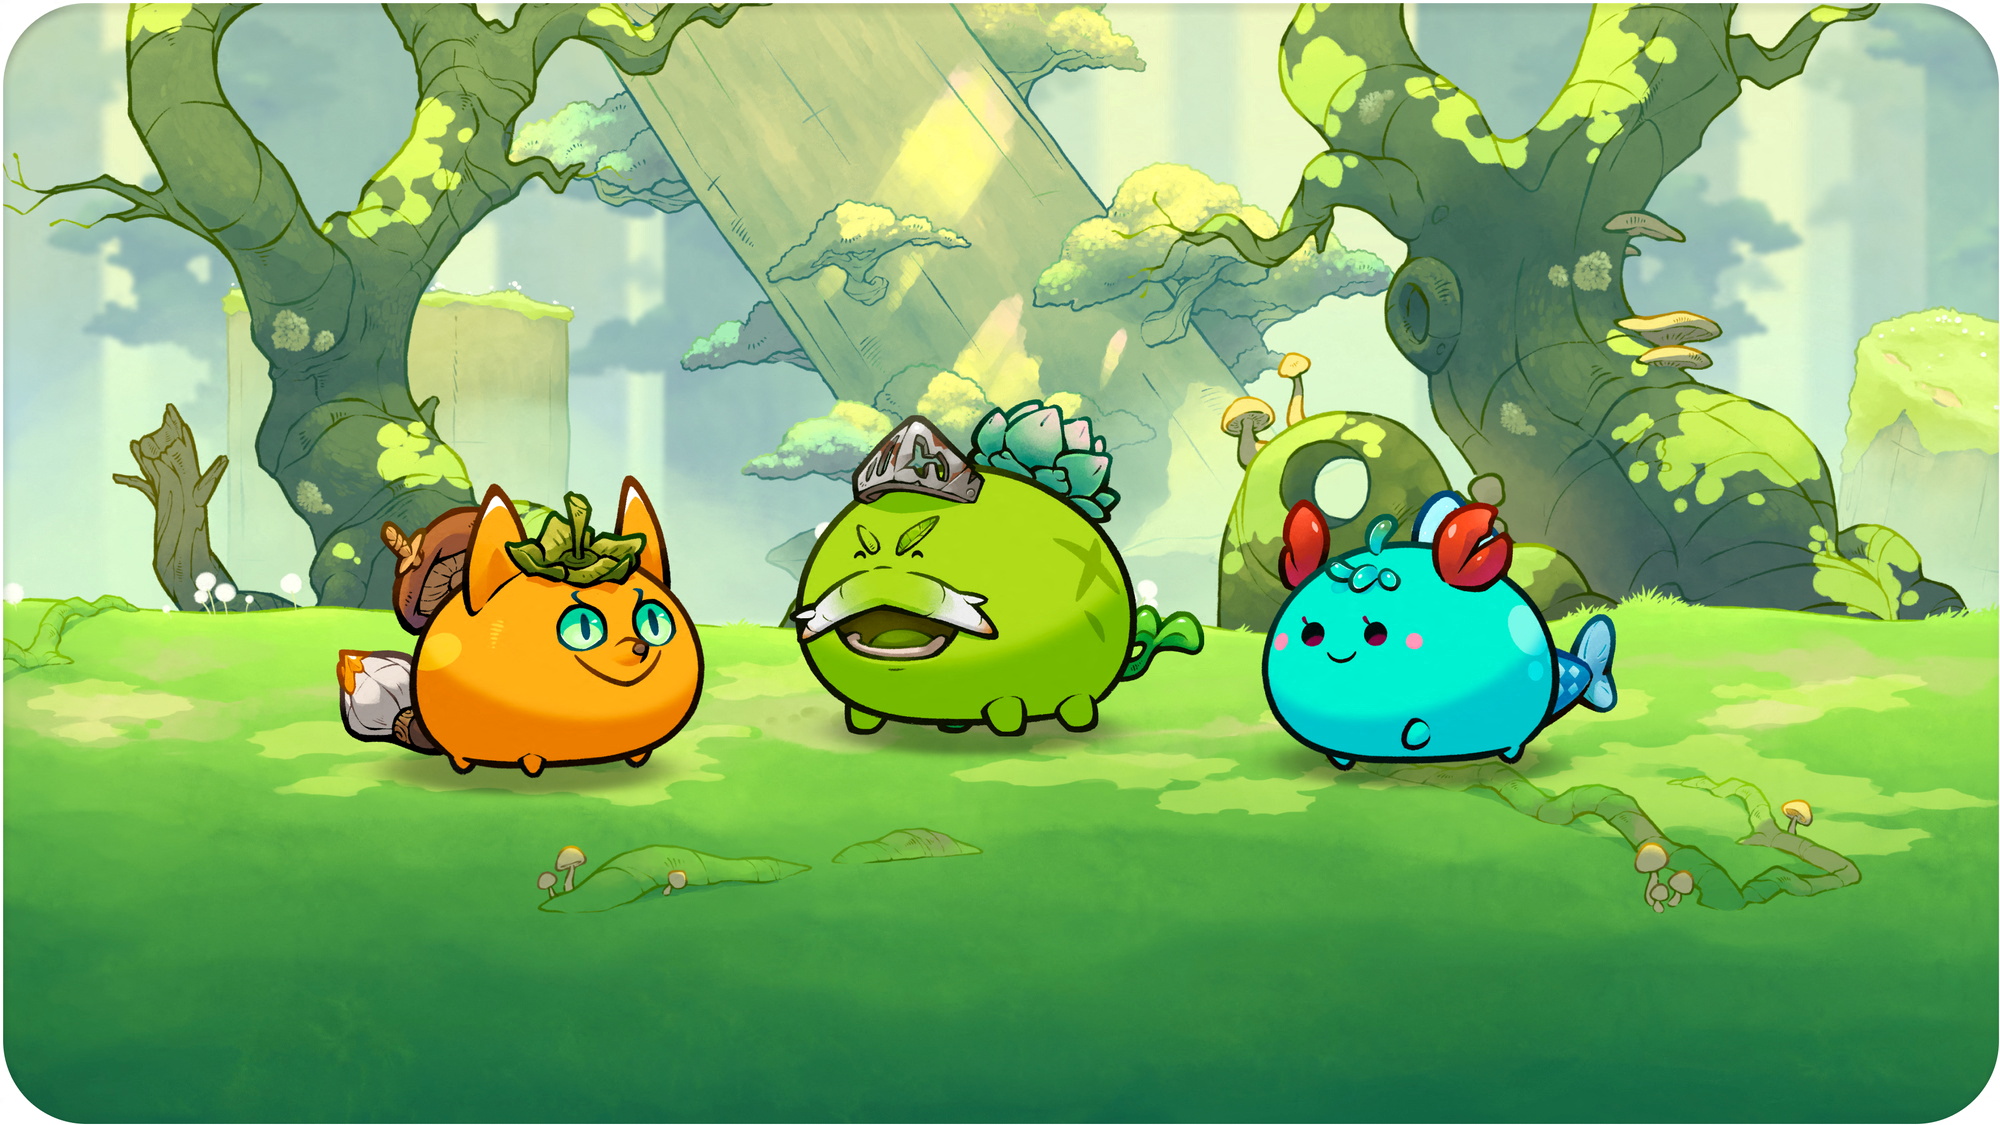 Handout image from the blockchain-based game Axie Infinity